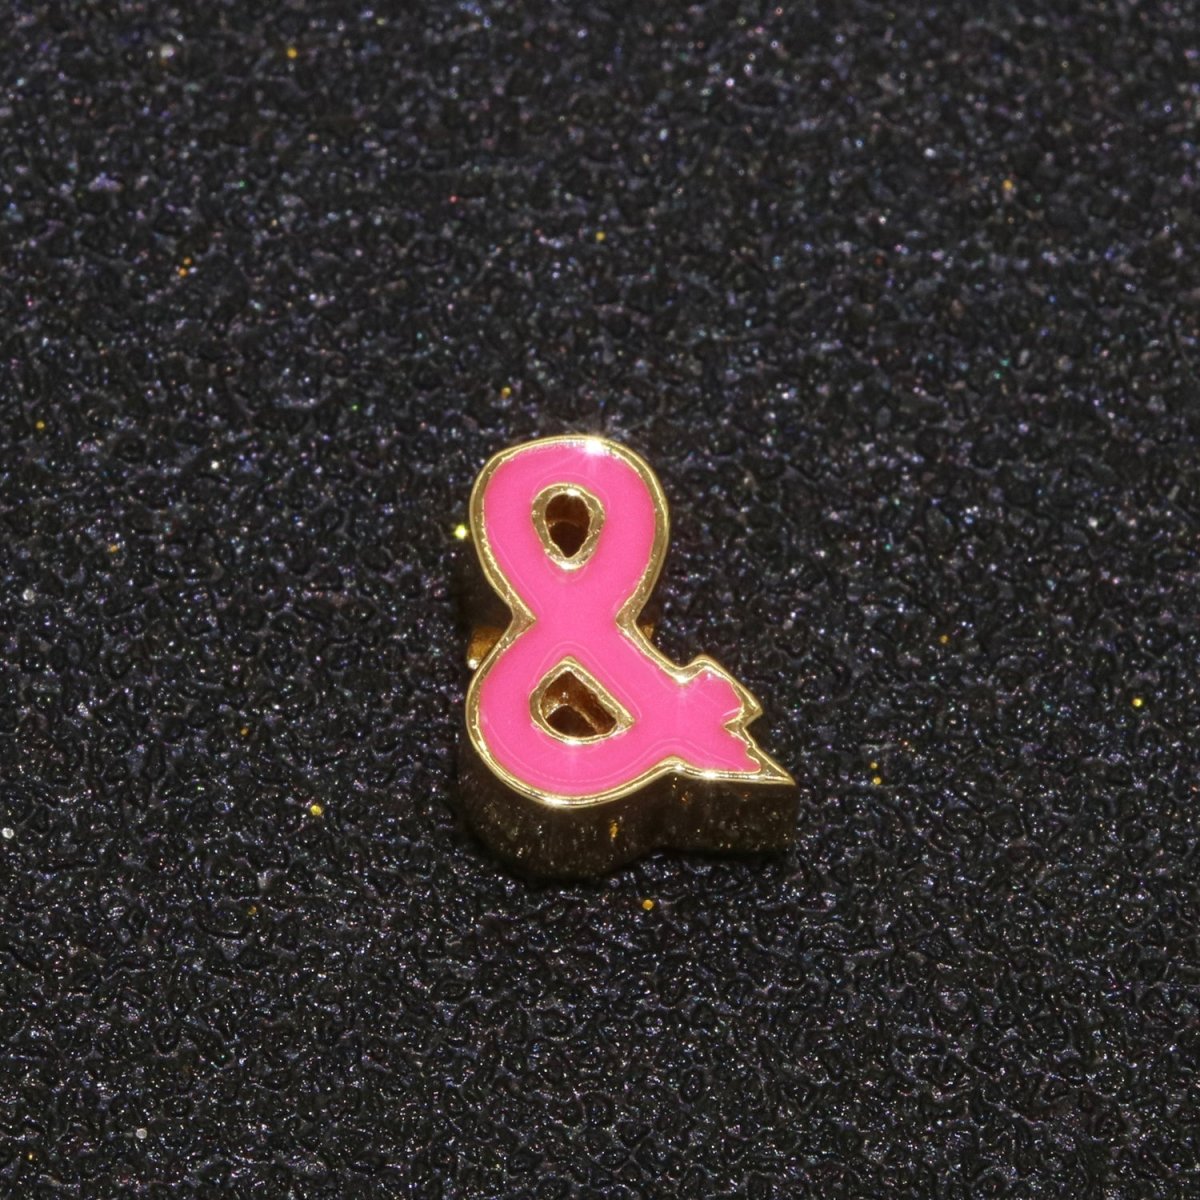 Gold Enamel Spacer Beads, Symbol Beads, Ampersand Beads Heart Star Pink Red Enamel Beads for Bracelet Necklace Component 8mm,10mm B-516 to B-527 - DLUXCA